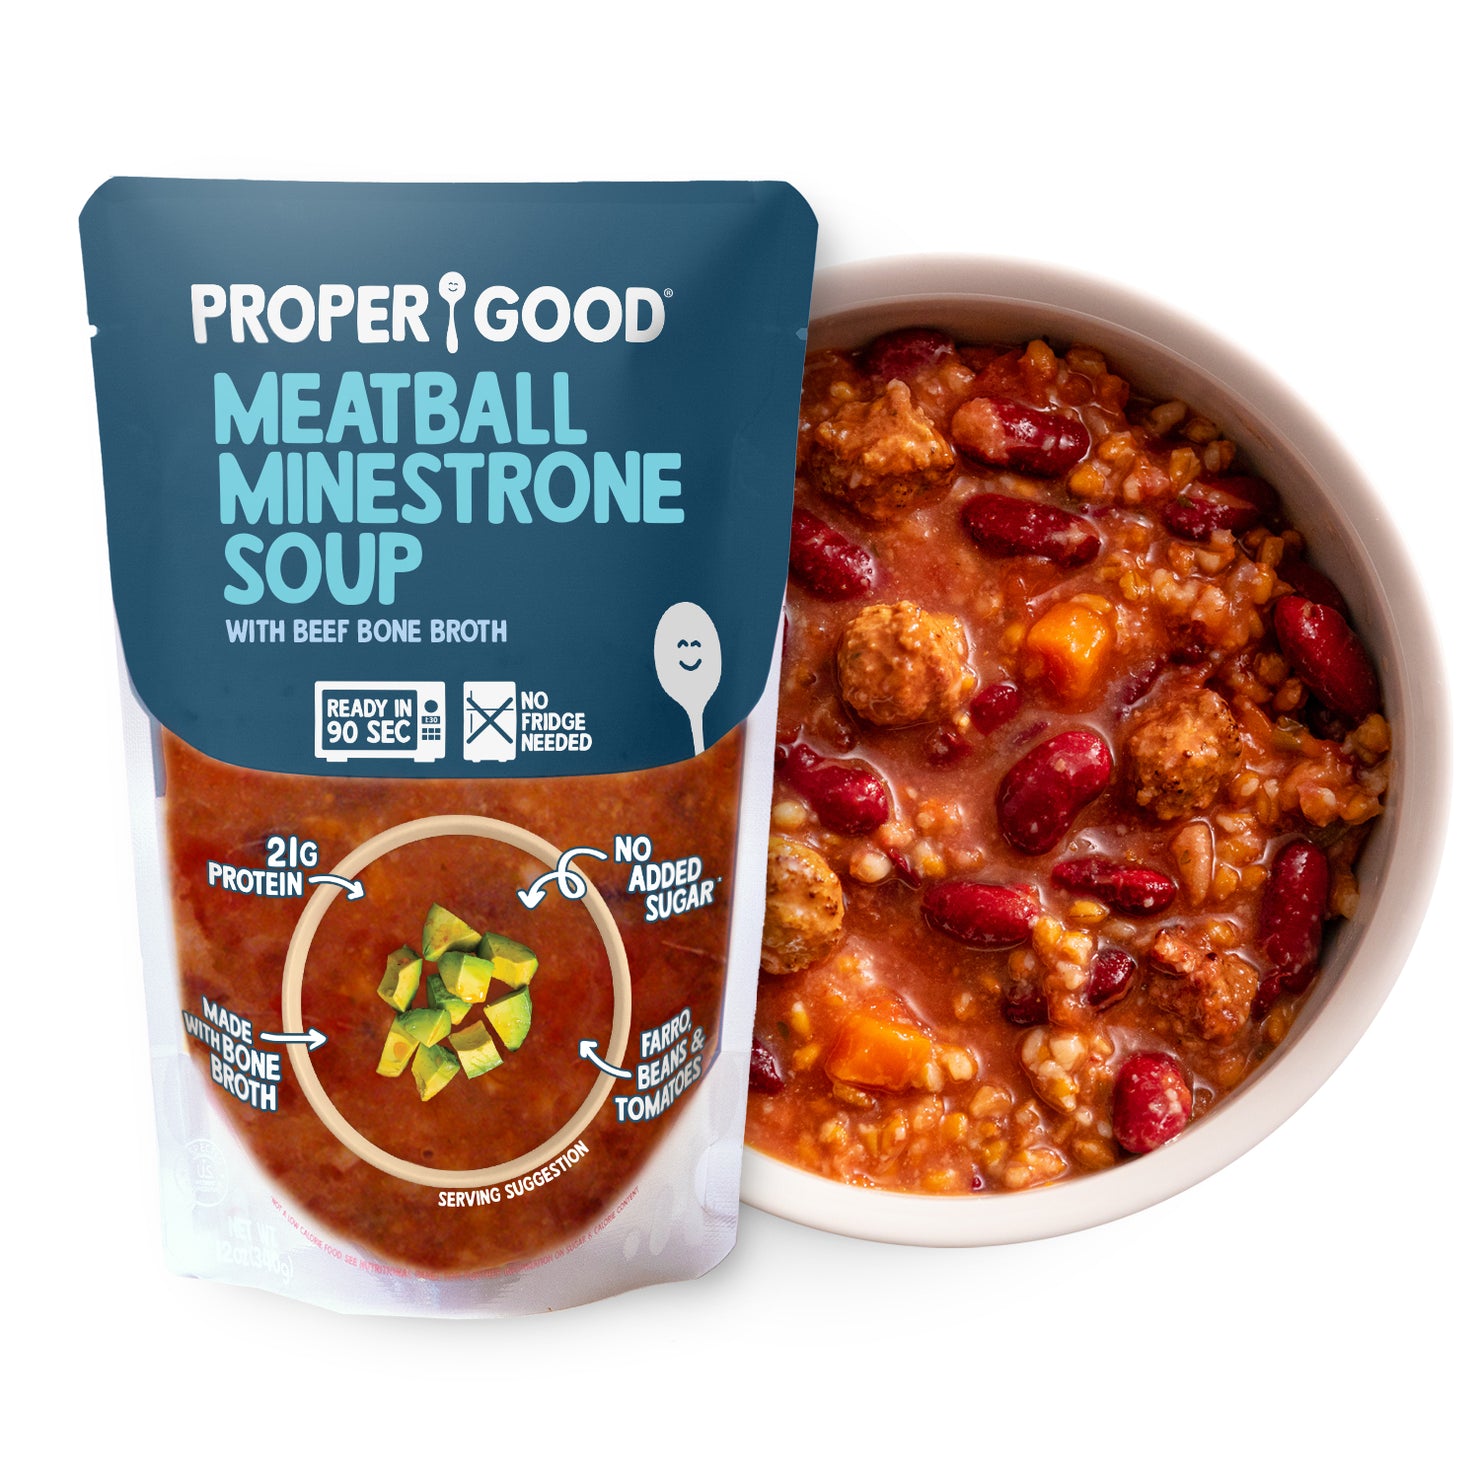 Meatball Minestrone Soup in Bowl and in Pouch - Eat Proper Good